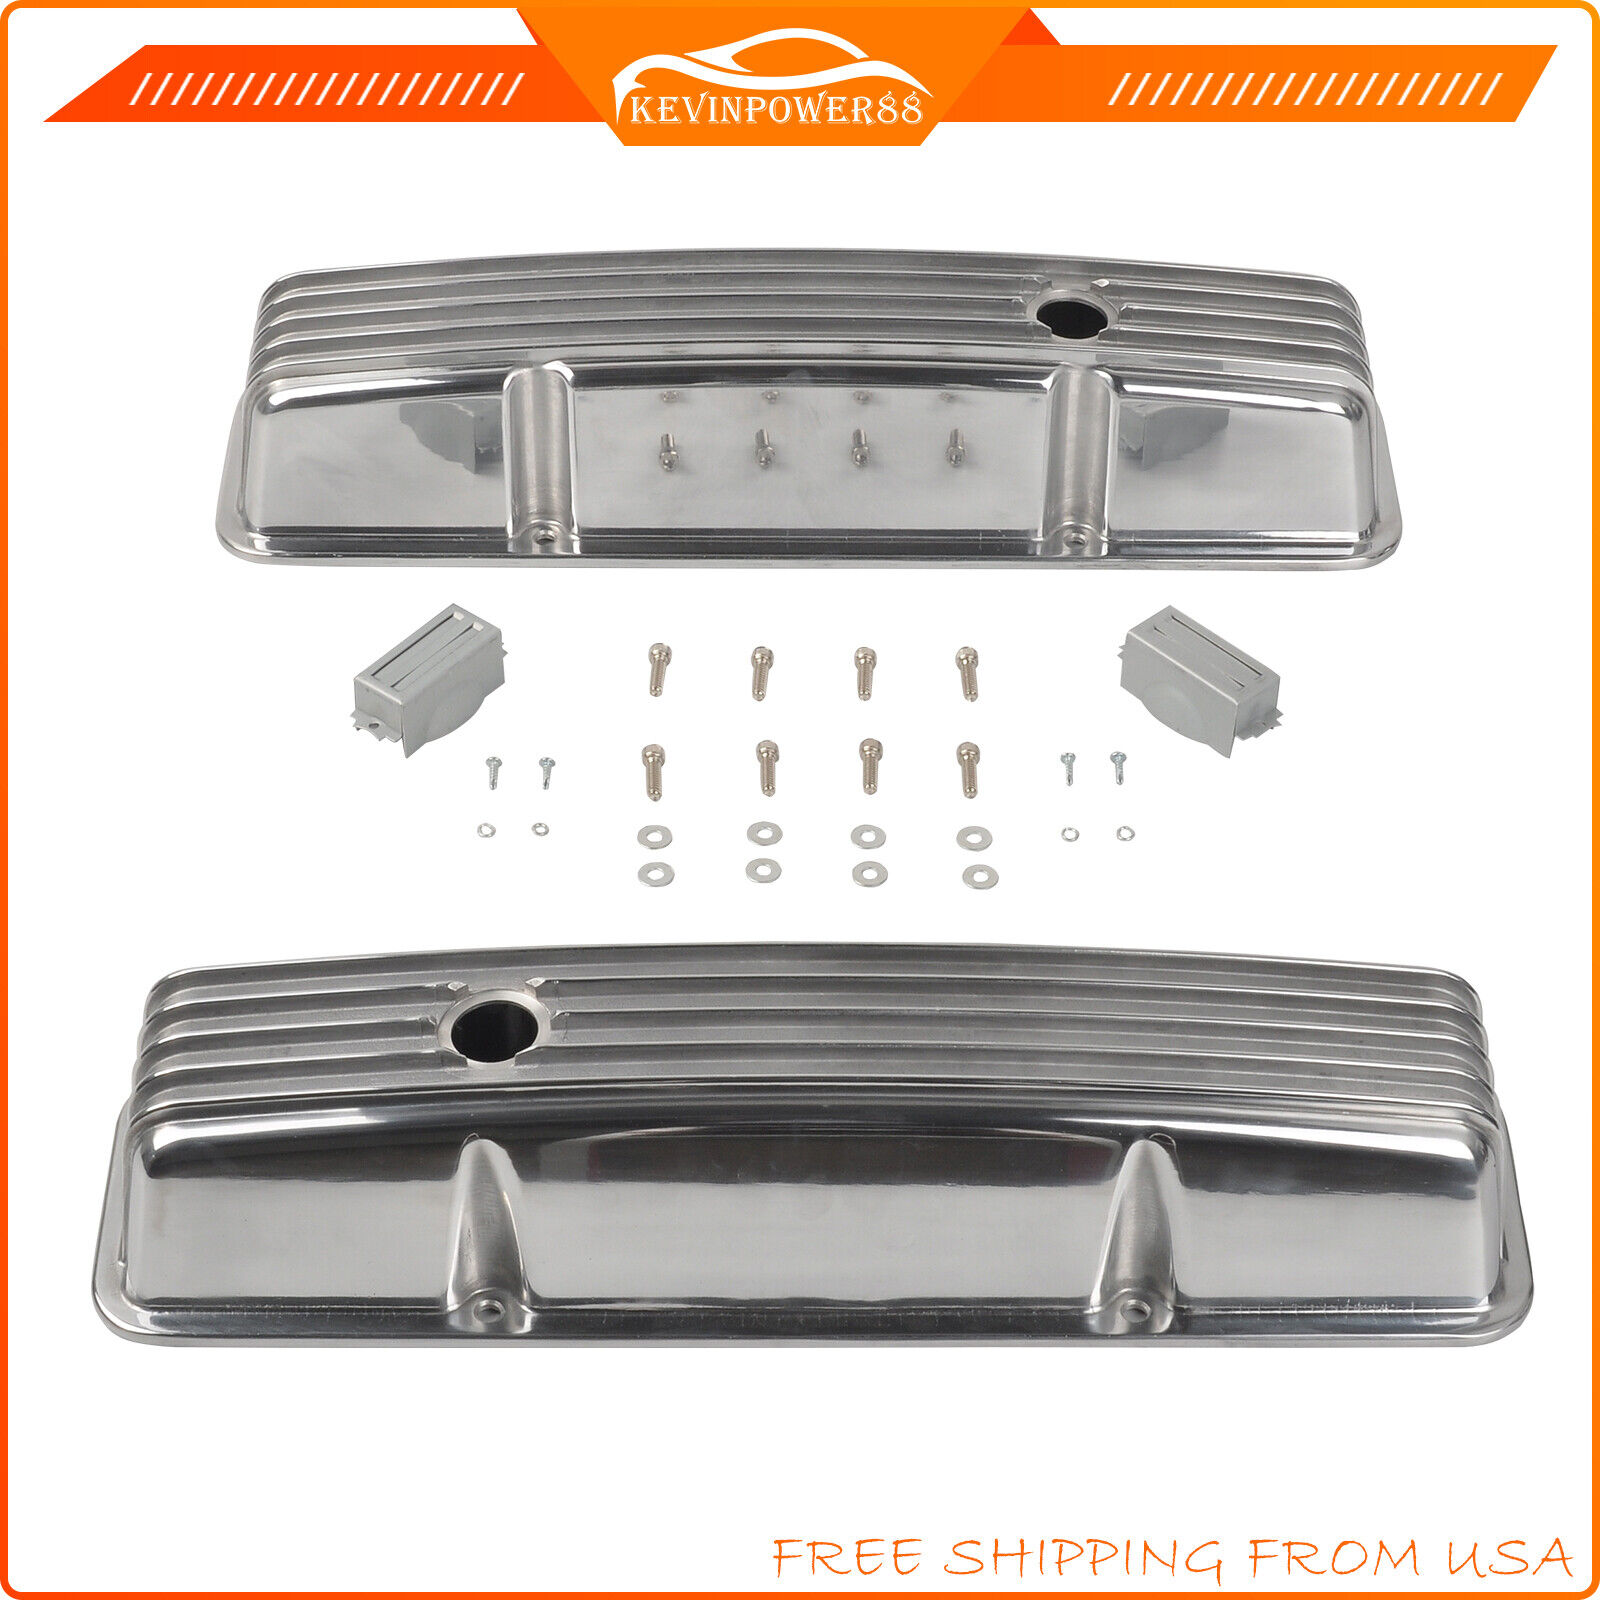 Polished Aluminum Finned Tall Valve Covers For 58-86 Small Block Chevy SBC 327